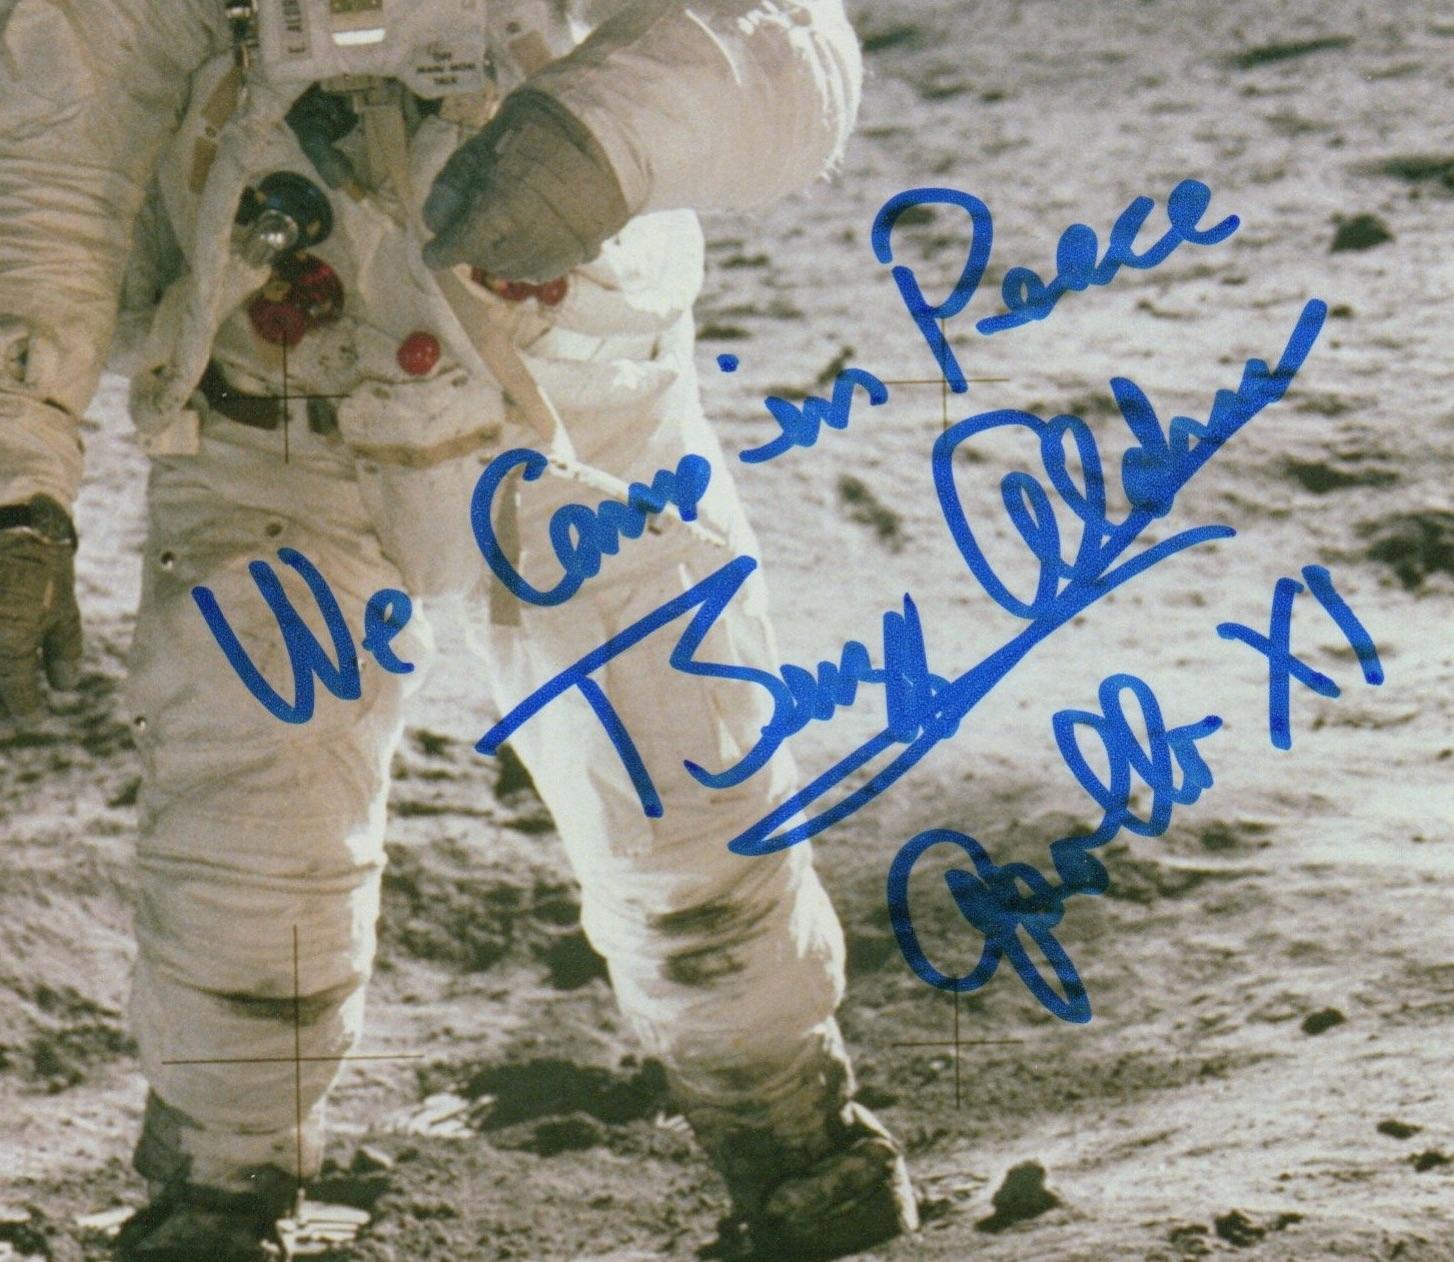 Presented is a signed color photograph of astronaut Buzz Aldrin during the Apollo XI Mission. In this NASA photograph, Aldrin, the lunar module pilot, walks on the surface of the Moon near the leg of the Lunar Module Eagle during the Apollo 11